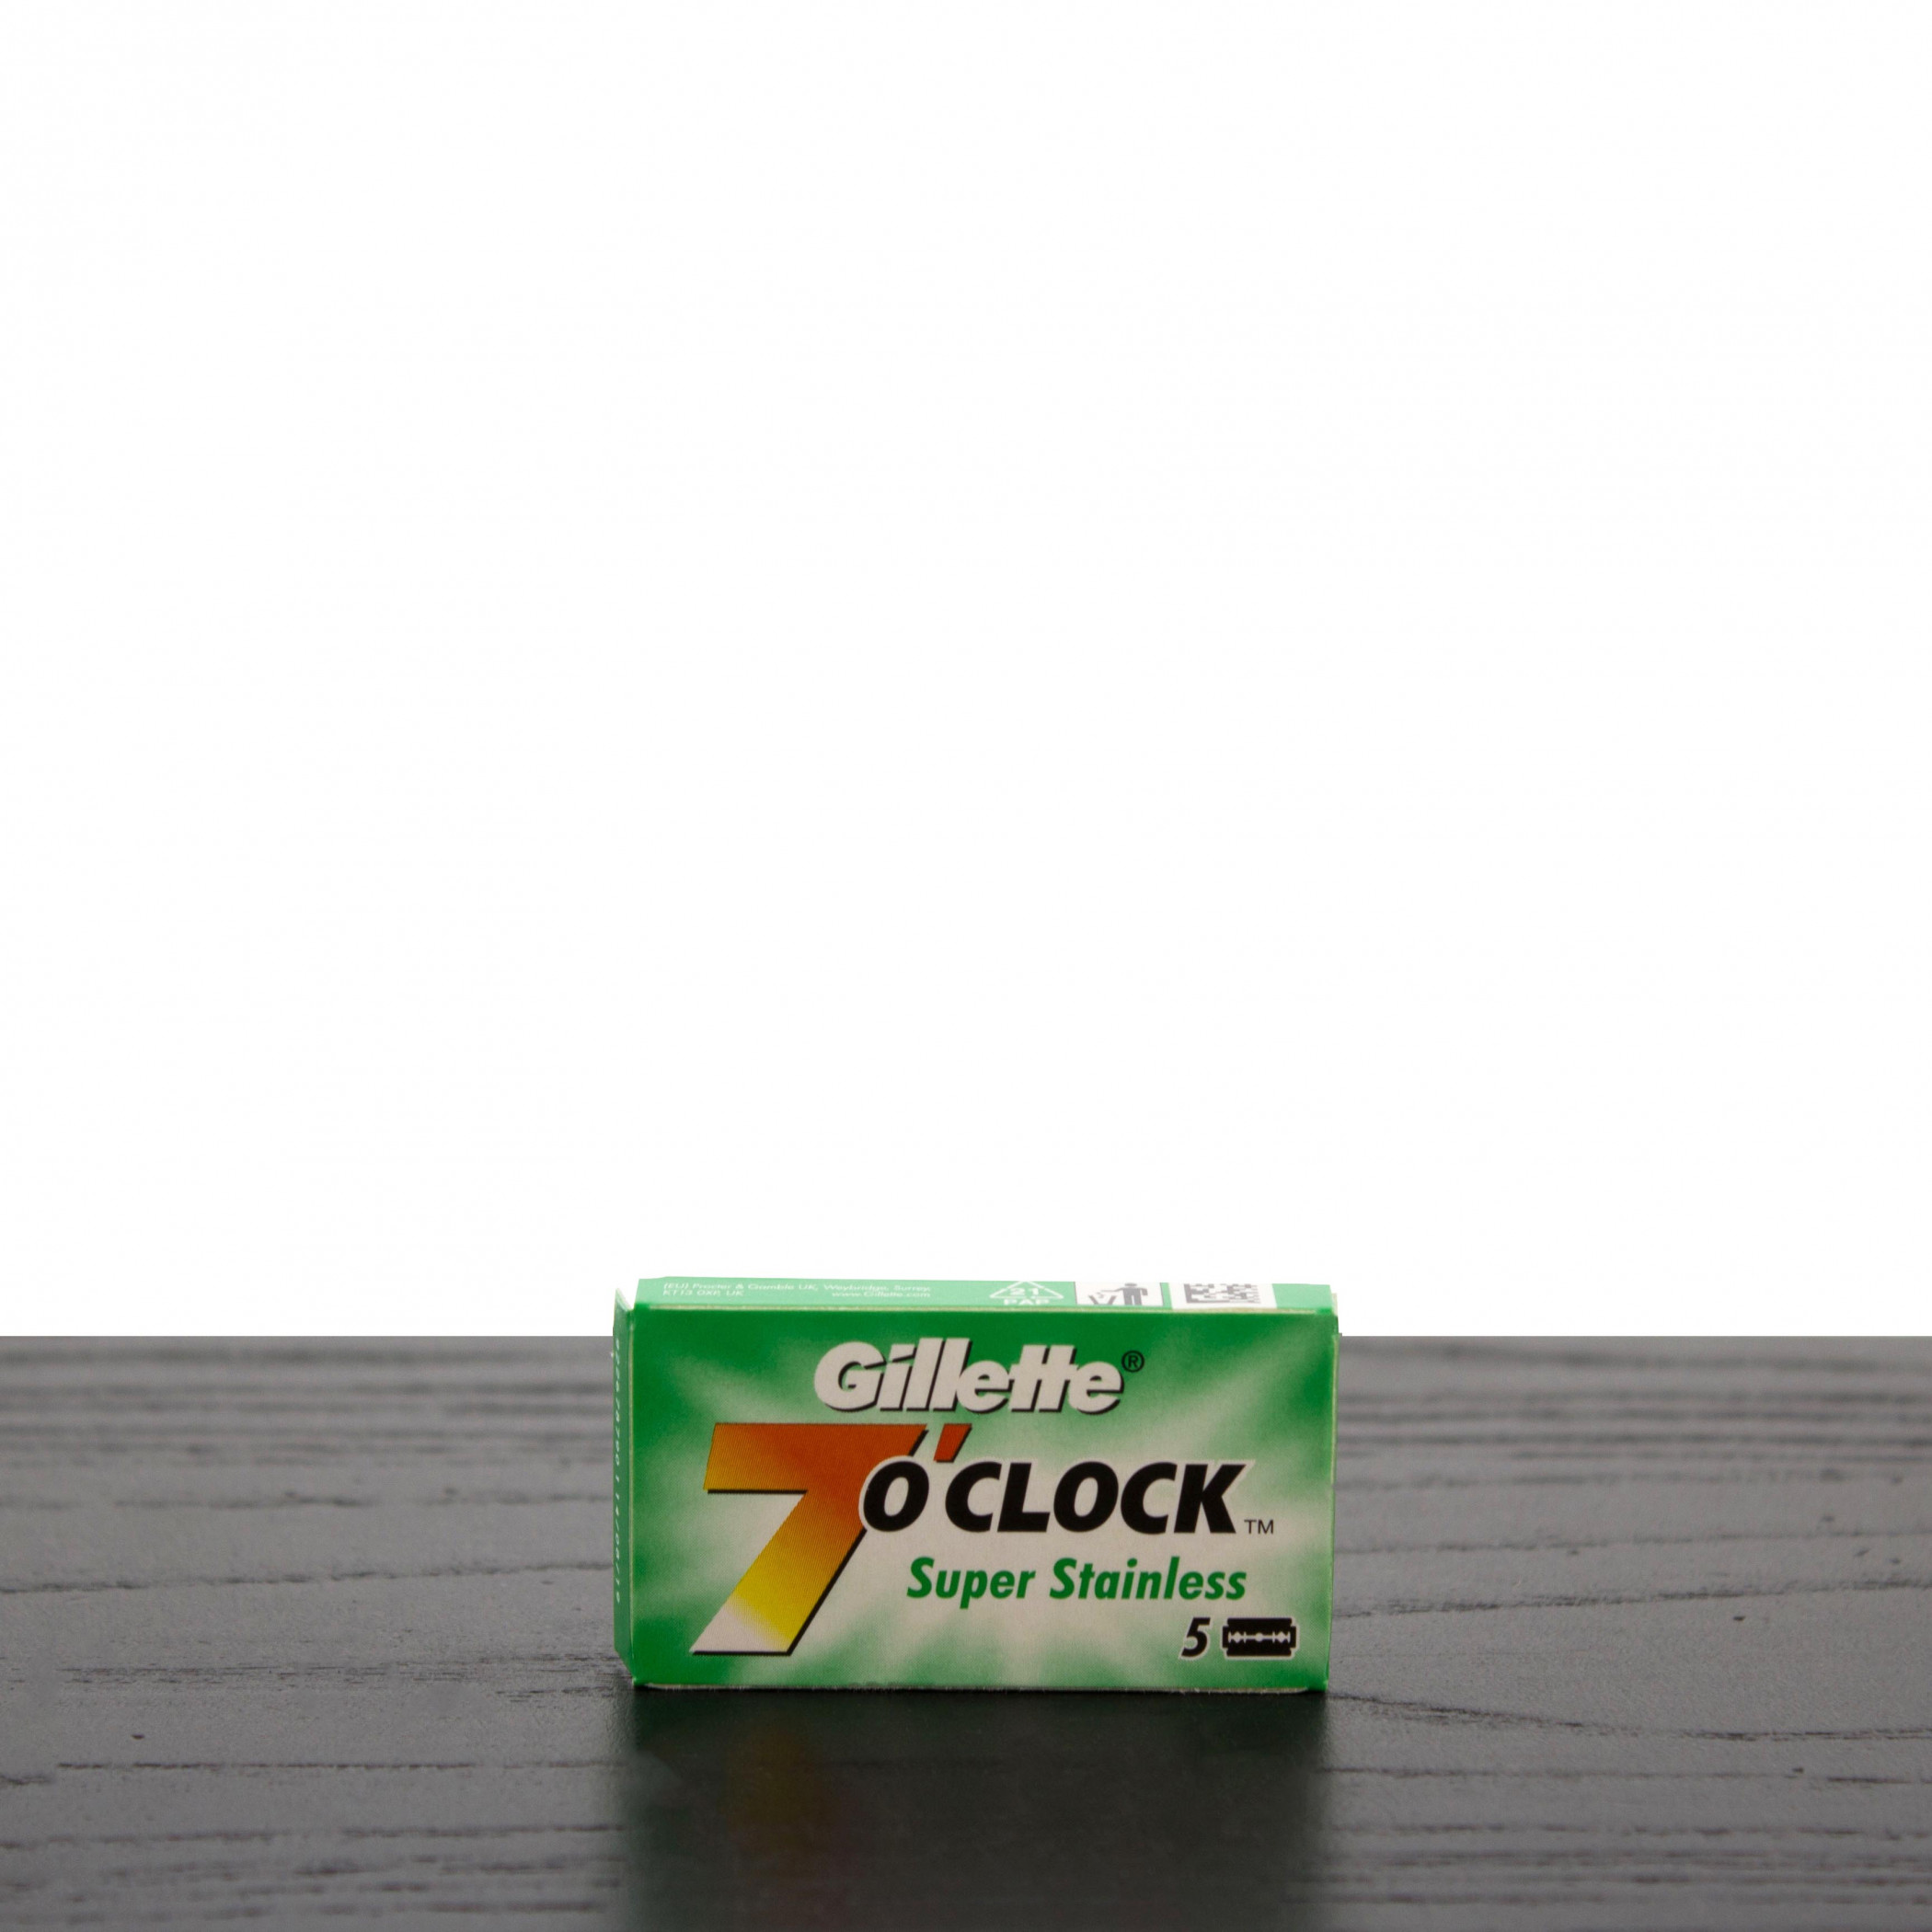 Product image 0 for Gillette 7 O'Clock Super Stainless Double Edge Razor Blades, Green